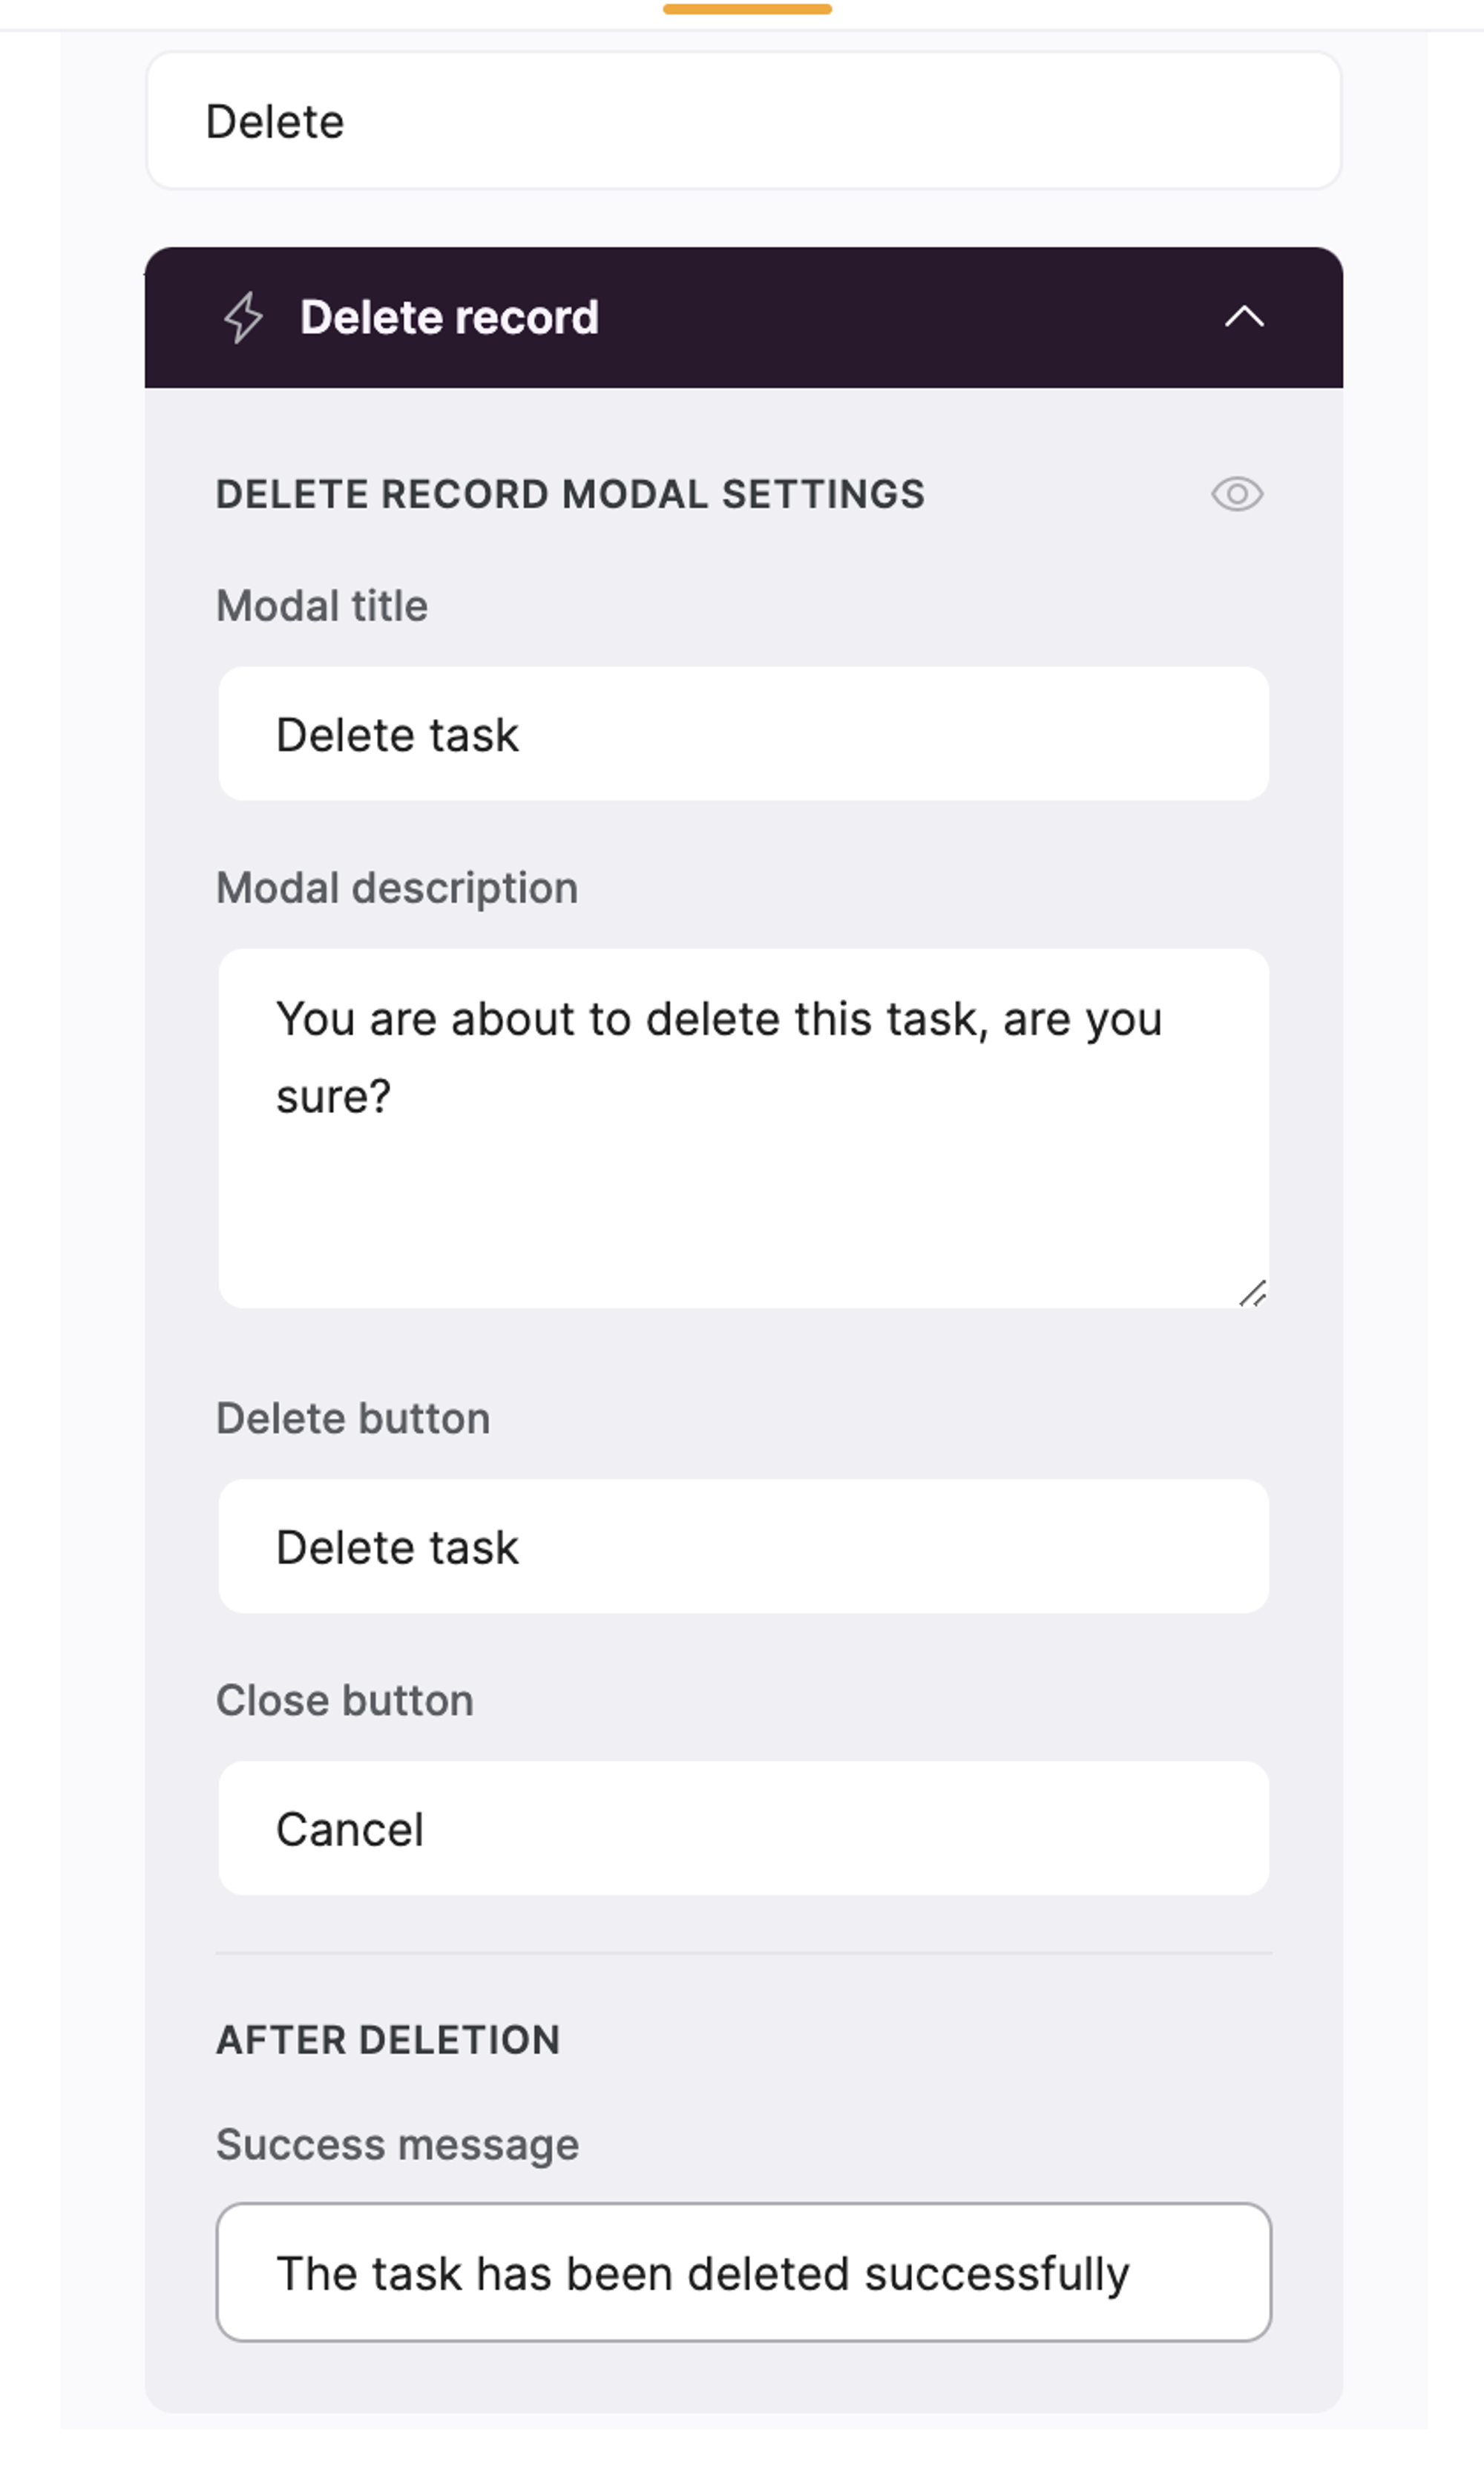 Configuring button and modal labels and other texts